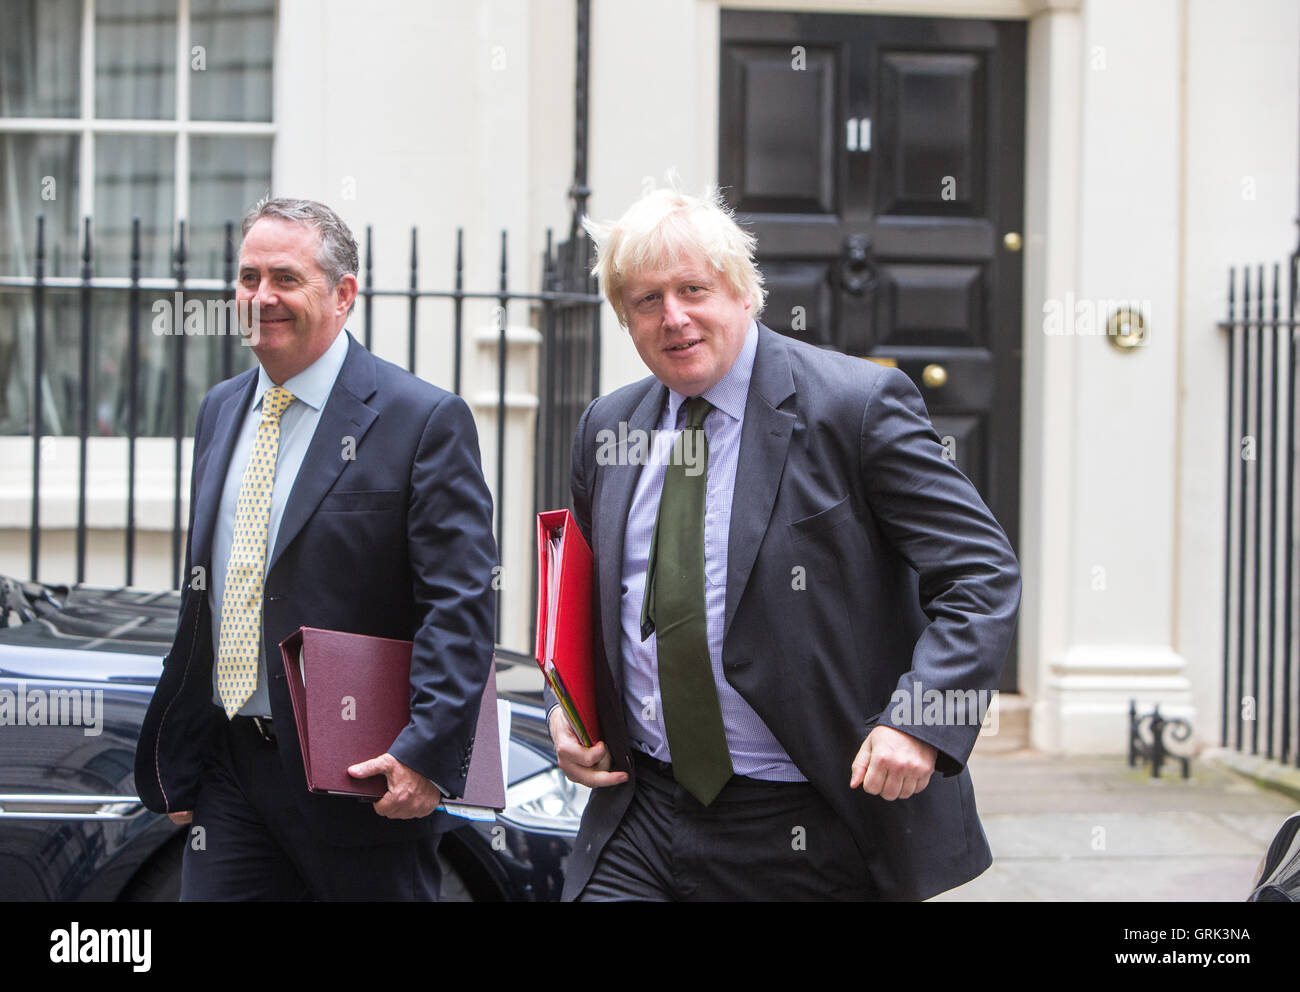 Boris Johnson,Foreign secretary and Liam Fox,secretary of state for International Trade, at Downing Street for a Cabinet meeting Stock Photo